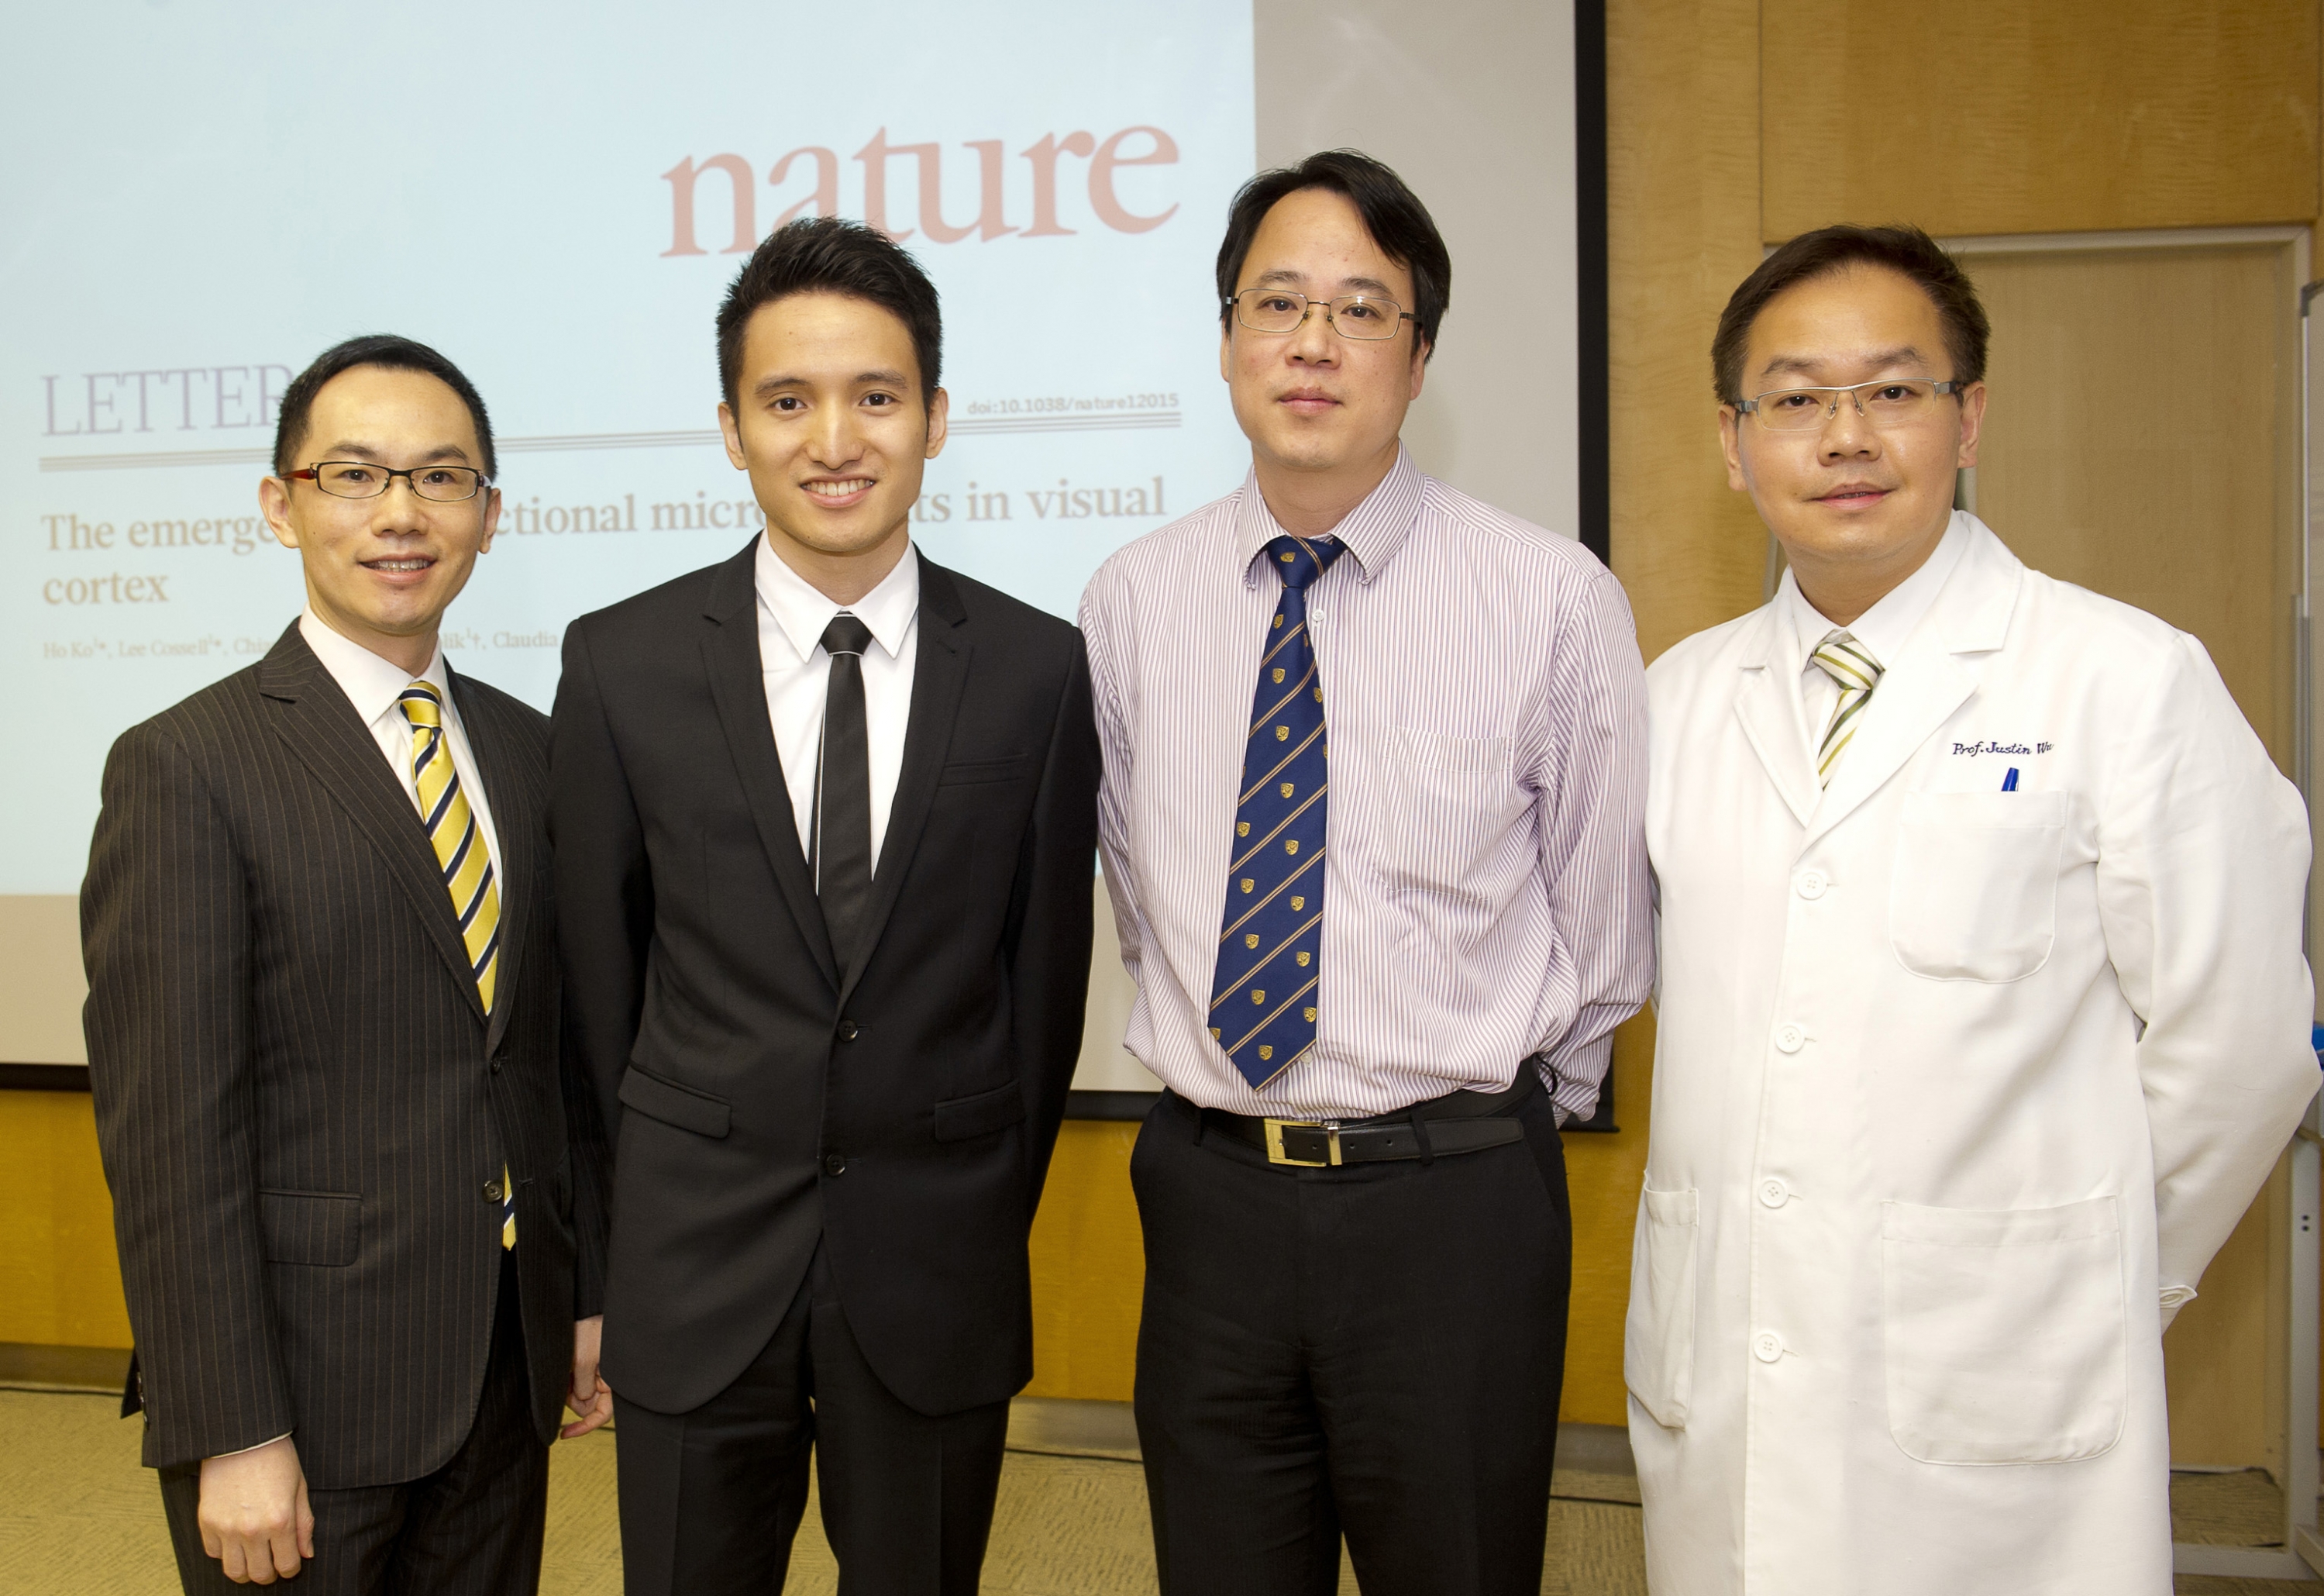 (From left) Prof. Vincent Chun-tong MOK, Assistant Dean (Clinical) and Professor, Division of Neurology, Department of Medicine and Therapeutics; Dr. Owen KO Ho, MBChB Year 3 student; Prof. Wing-ho YUNG, Professor, School of Biomedical Sciences and Prof. Justin Che-yuen WU, Associate Dean (Clinical), Faculty of Medicine at CUHK.